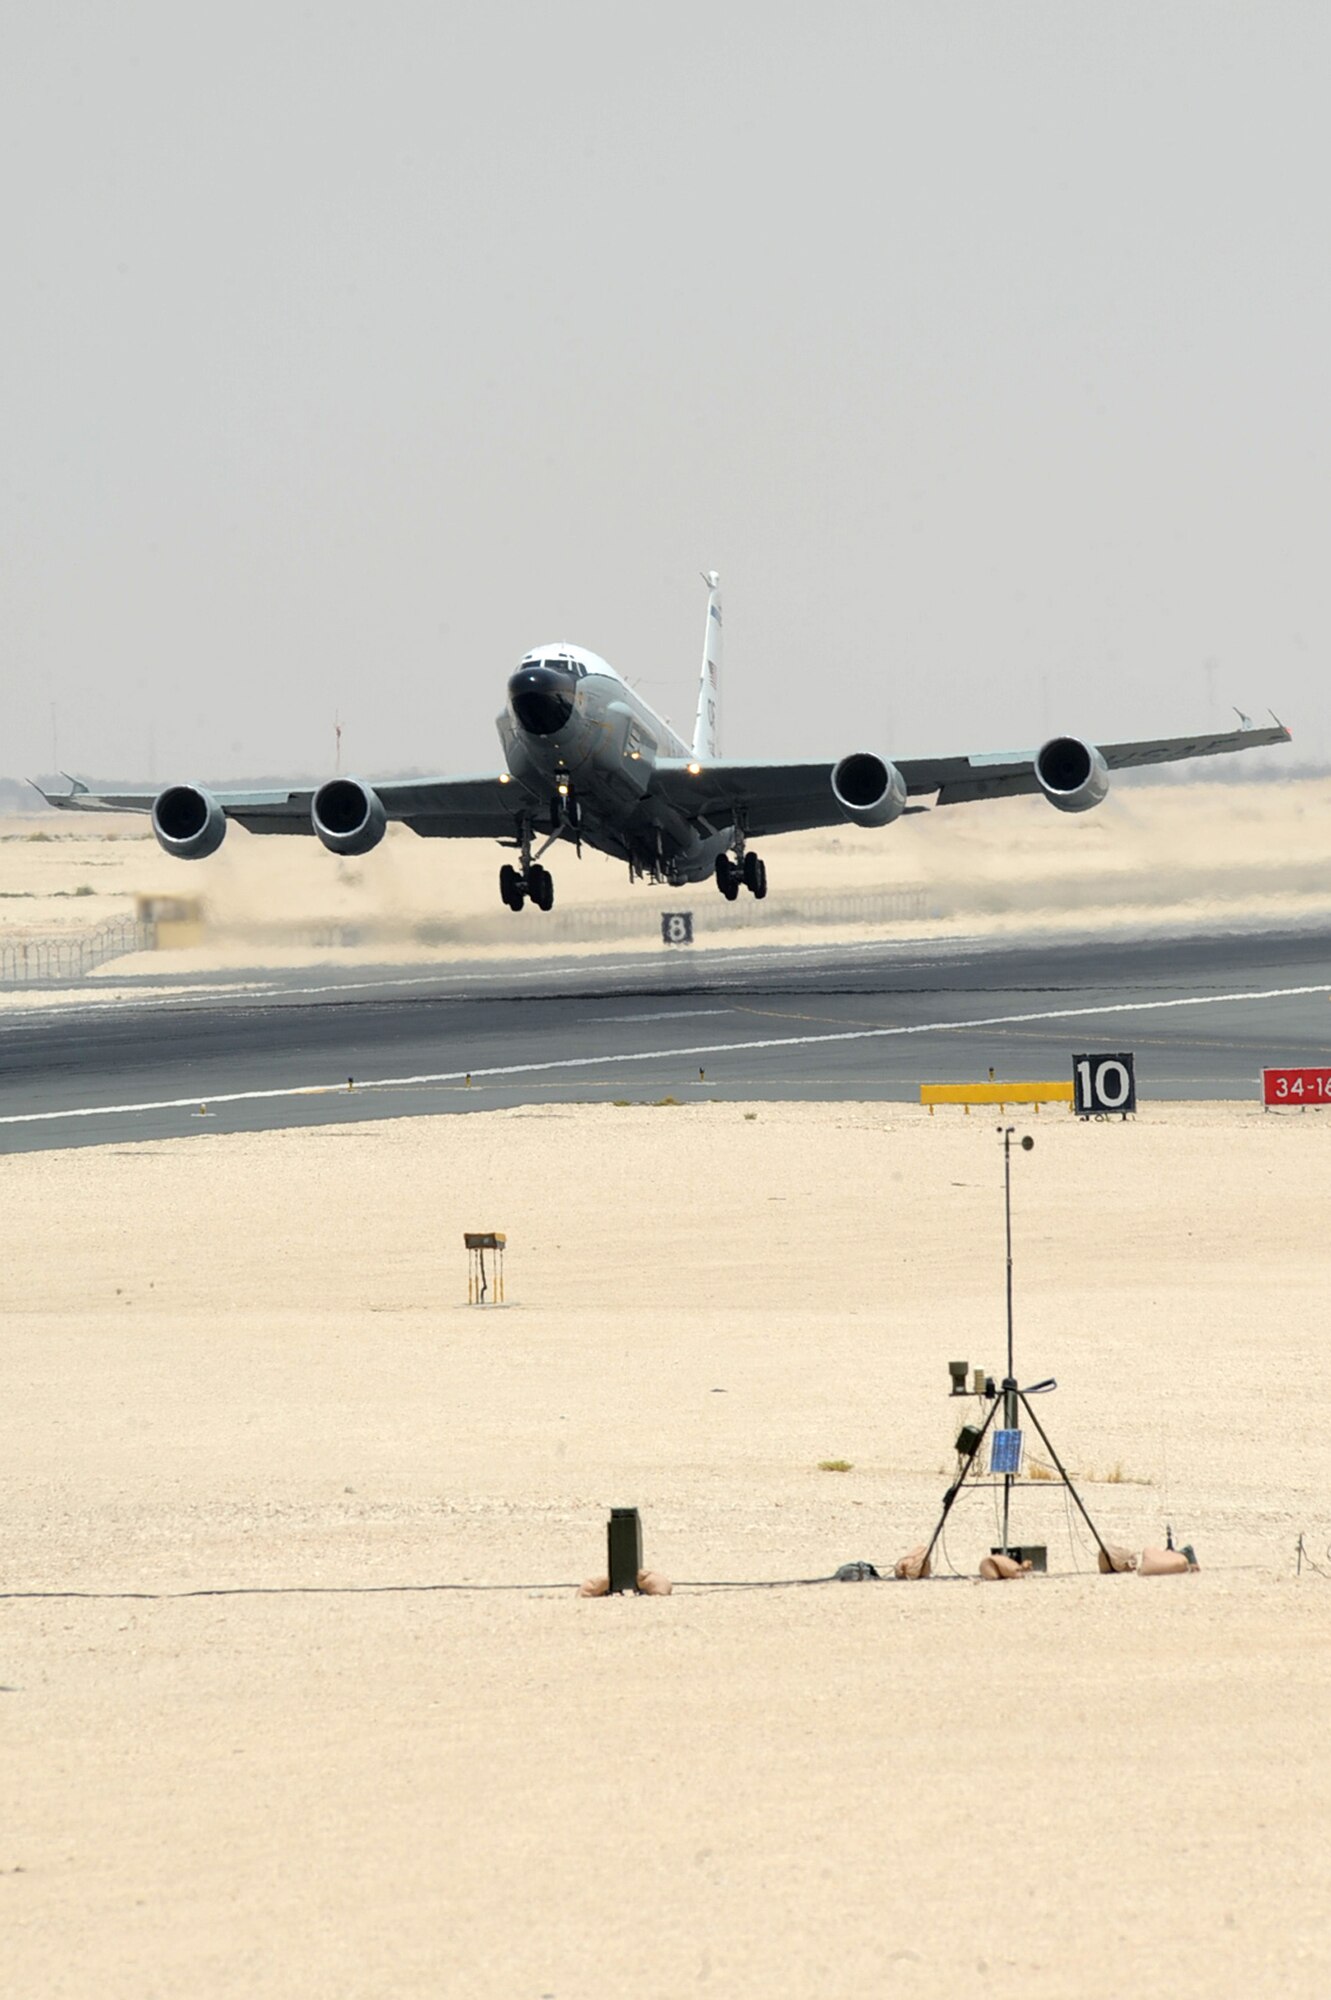 An RC-135V/W Rivet Joint takes-off at non-disclosed Southwest Asia location May 12, 2010. The RC-135 is a reconnaissance aircraft supporting theater and national-level consumers with near real time on-scene intelligence collection, analysis and dissemination capabilities. (U.S. Air Force photo by Senior Airman Kasey Zickmund)[RELEASED]